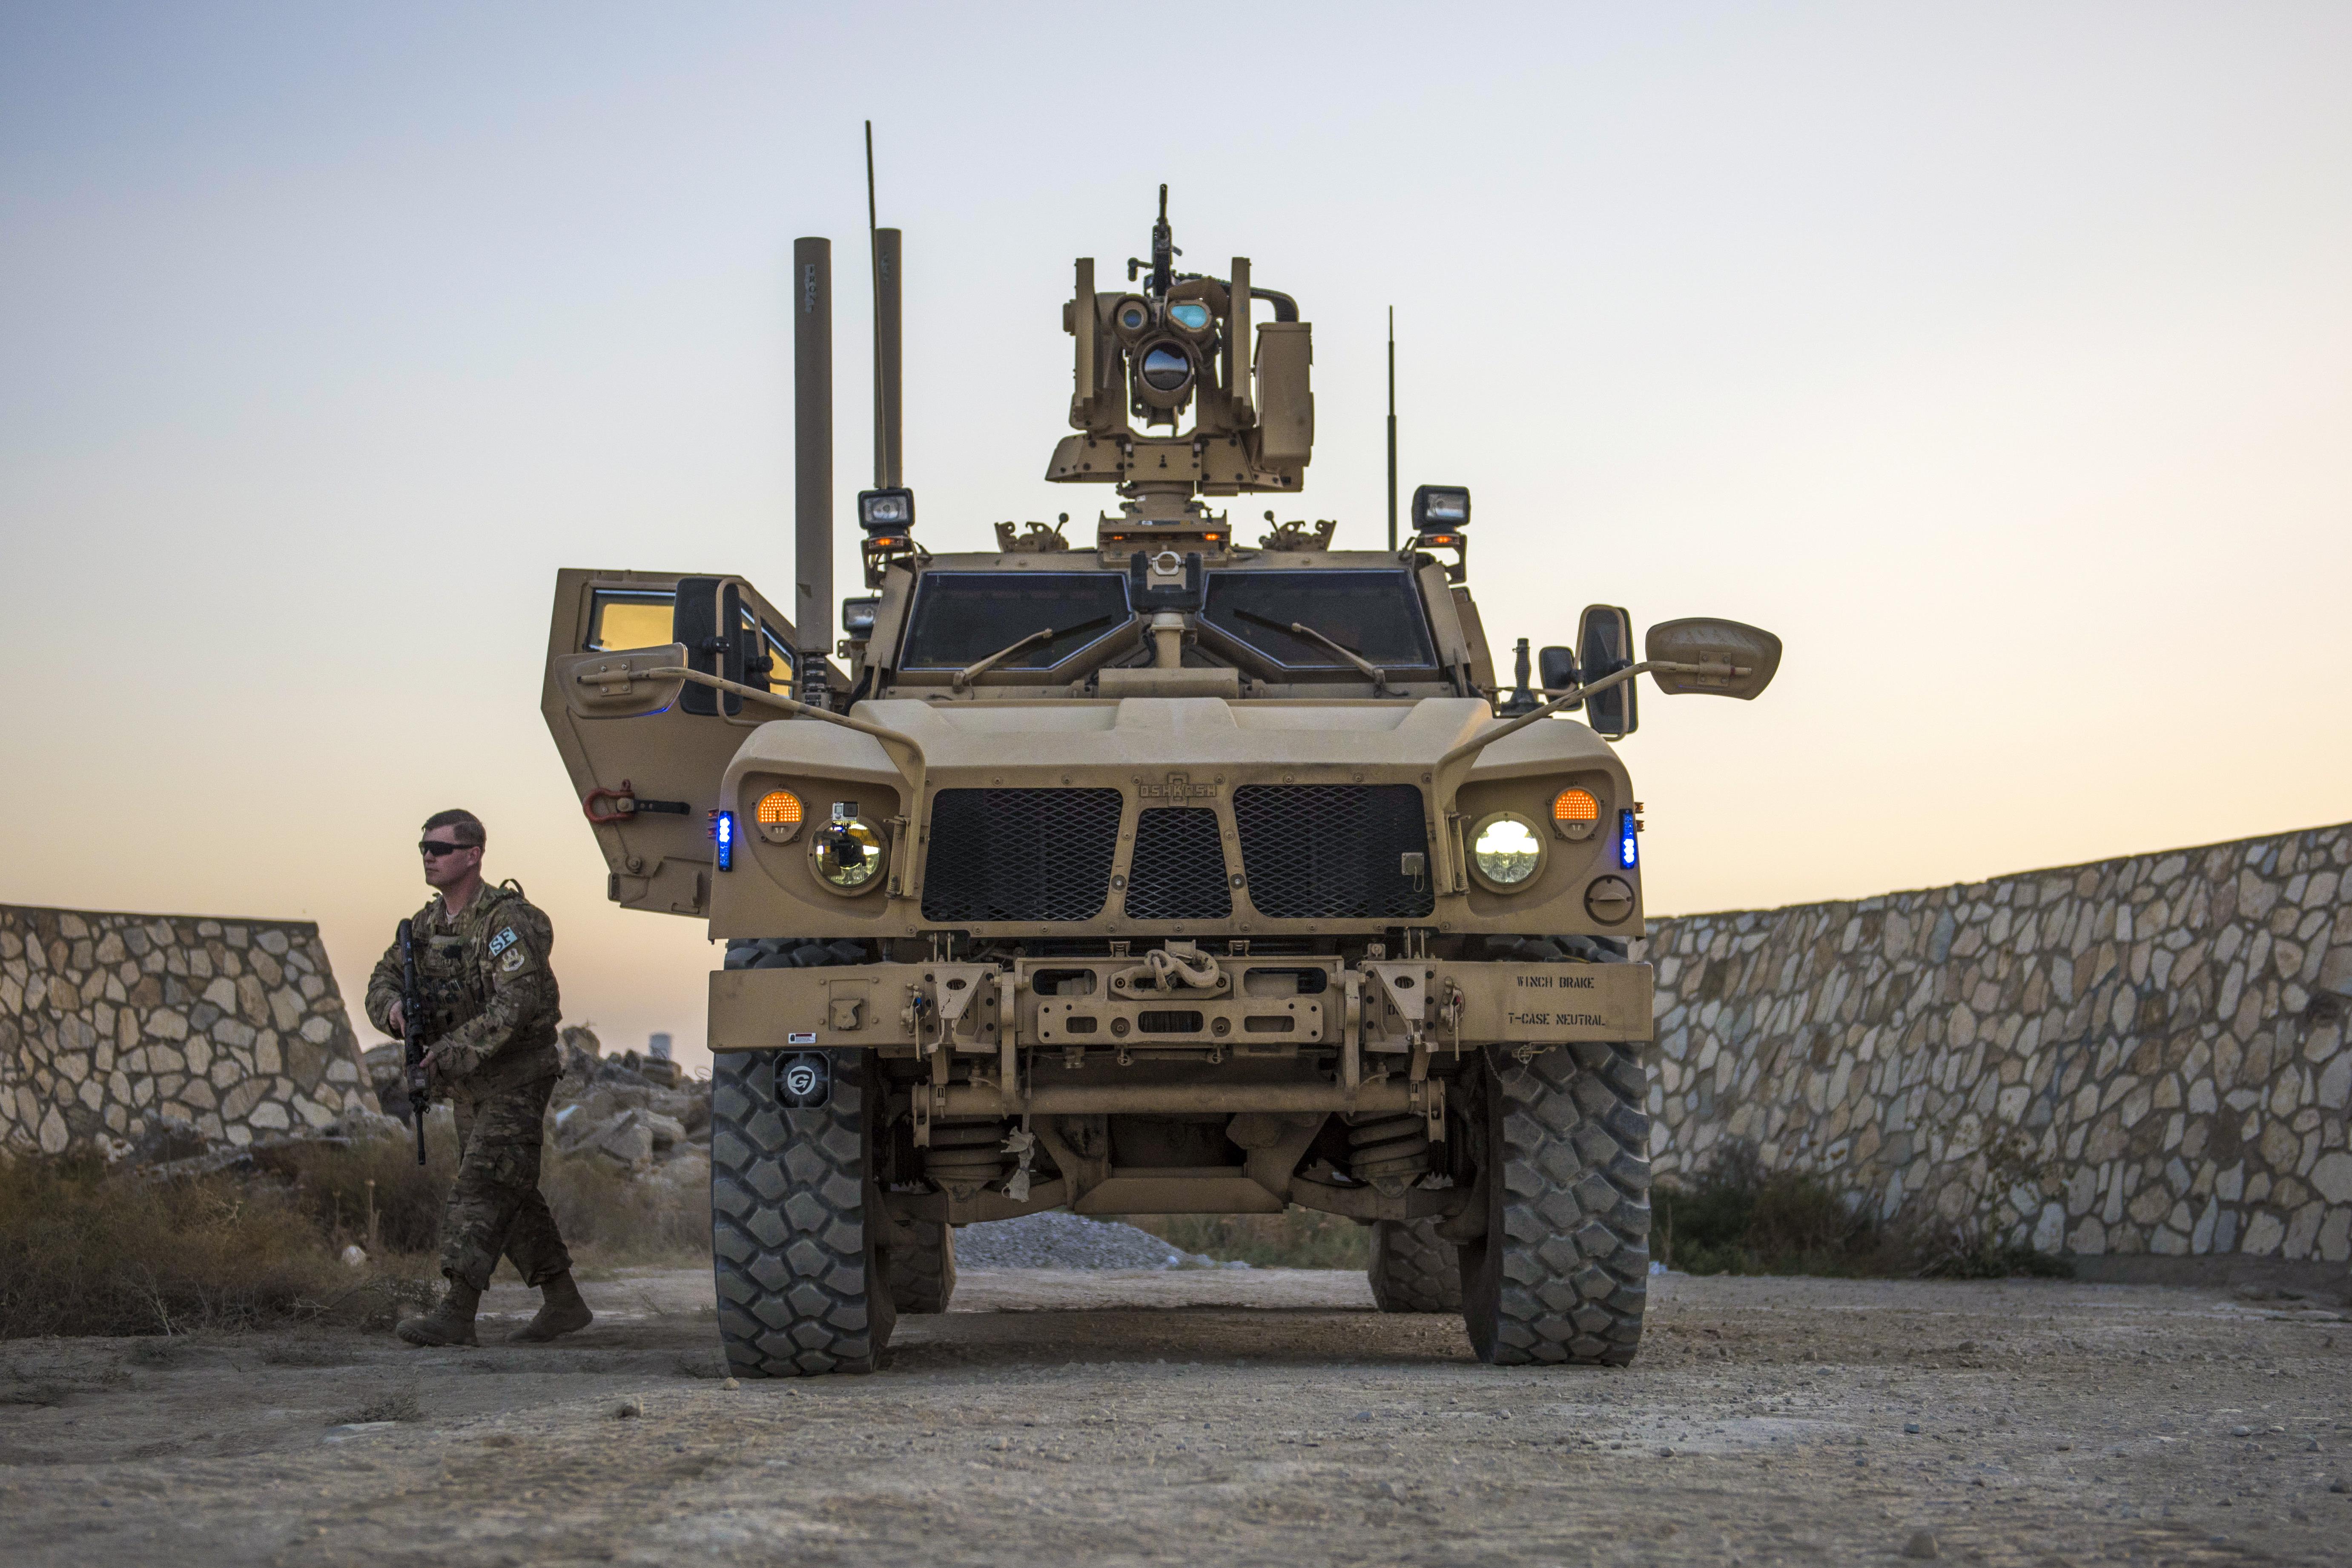 Air Force Senior Airman Michael Van Deusen gets out of a mine-resistant, ambush-protected vehicle to check buildings and a bunker during a flightline security patrol at Bagram Airfield, Afghanistan, Sept. 27, 2016. Deusen is a quick reaction force member assigned to the 455th Expeditionary Security Forces Squadron. Air Force photo by Senior Airman Justyn M. Freeman